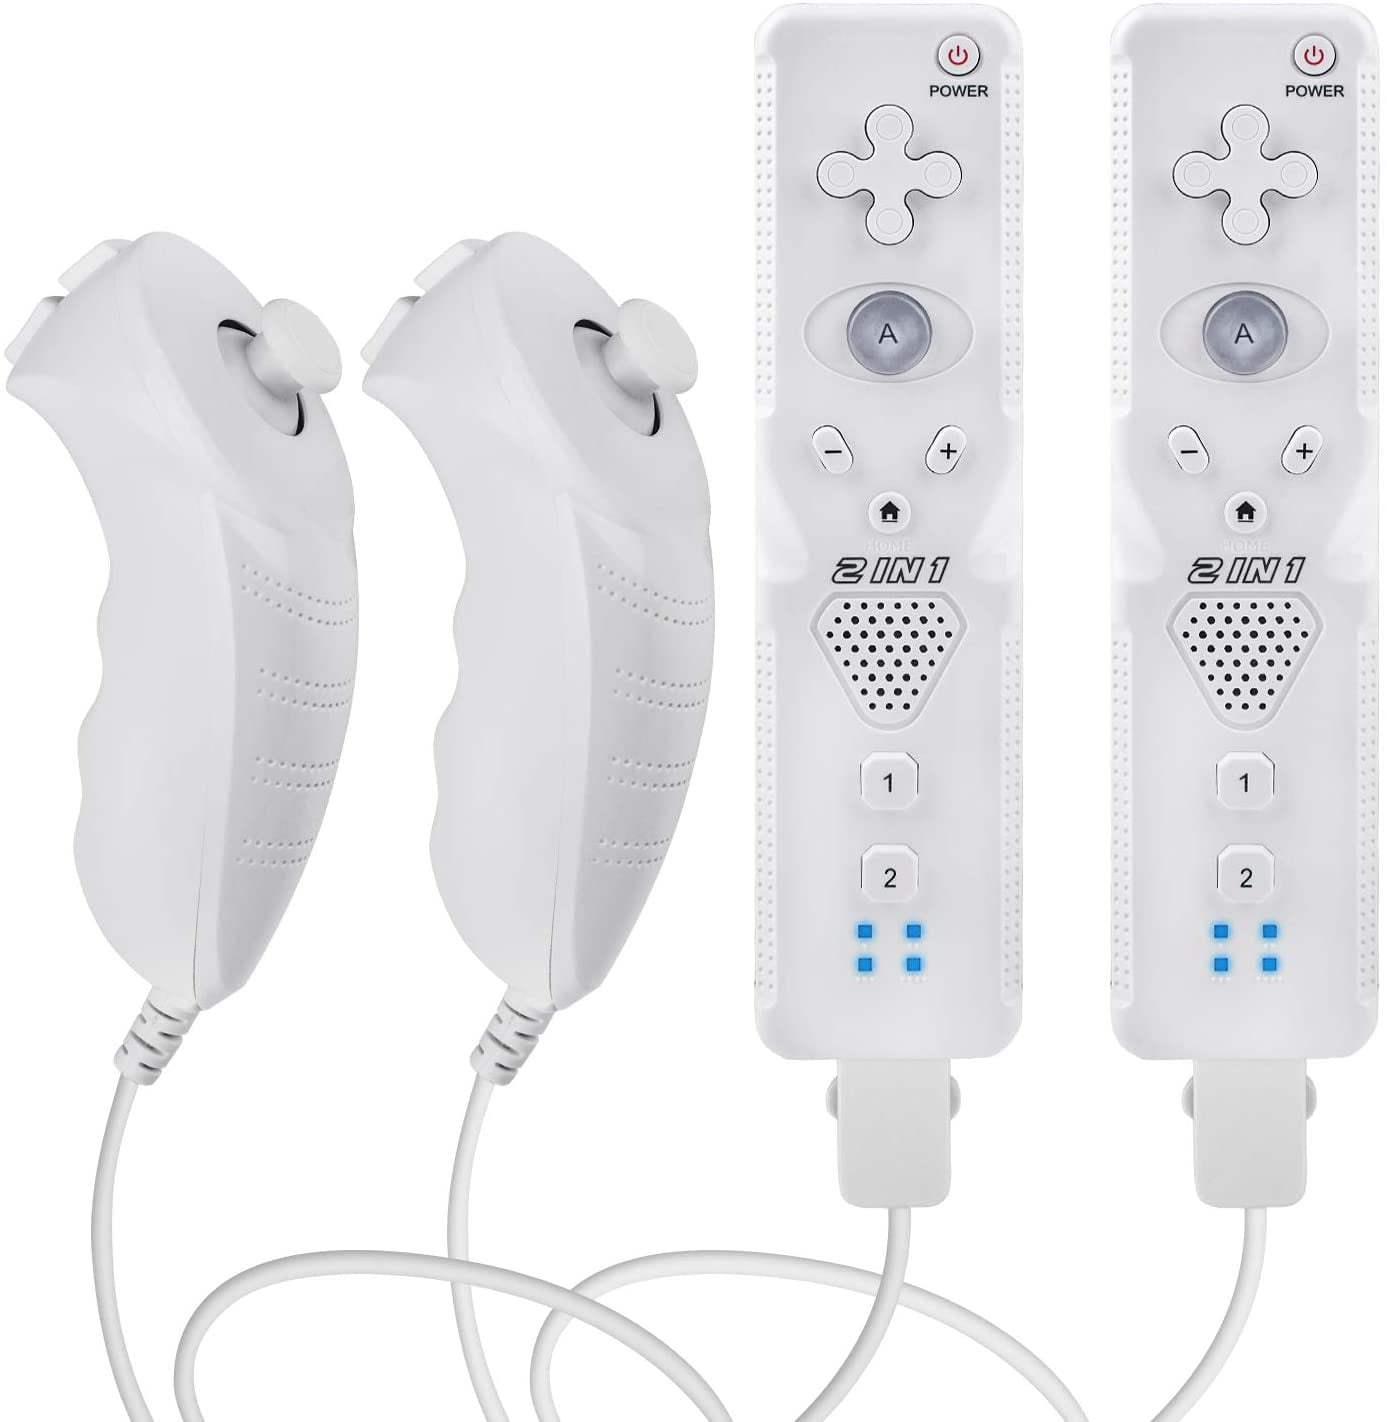 Wiimote Built in Motion Plus Inside Remote Controller For Nintendo wii HOT  - International Society of Hypertension